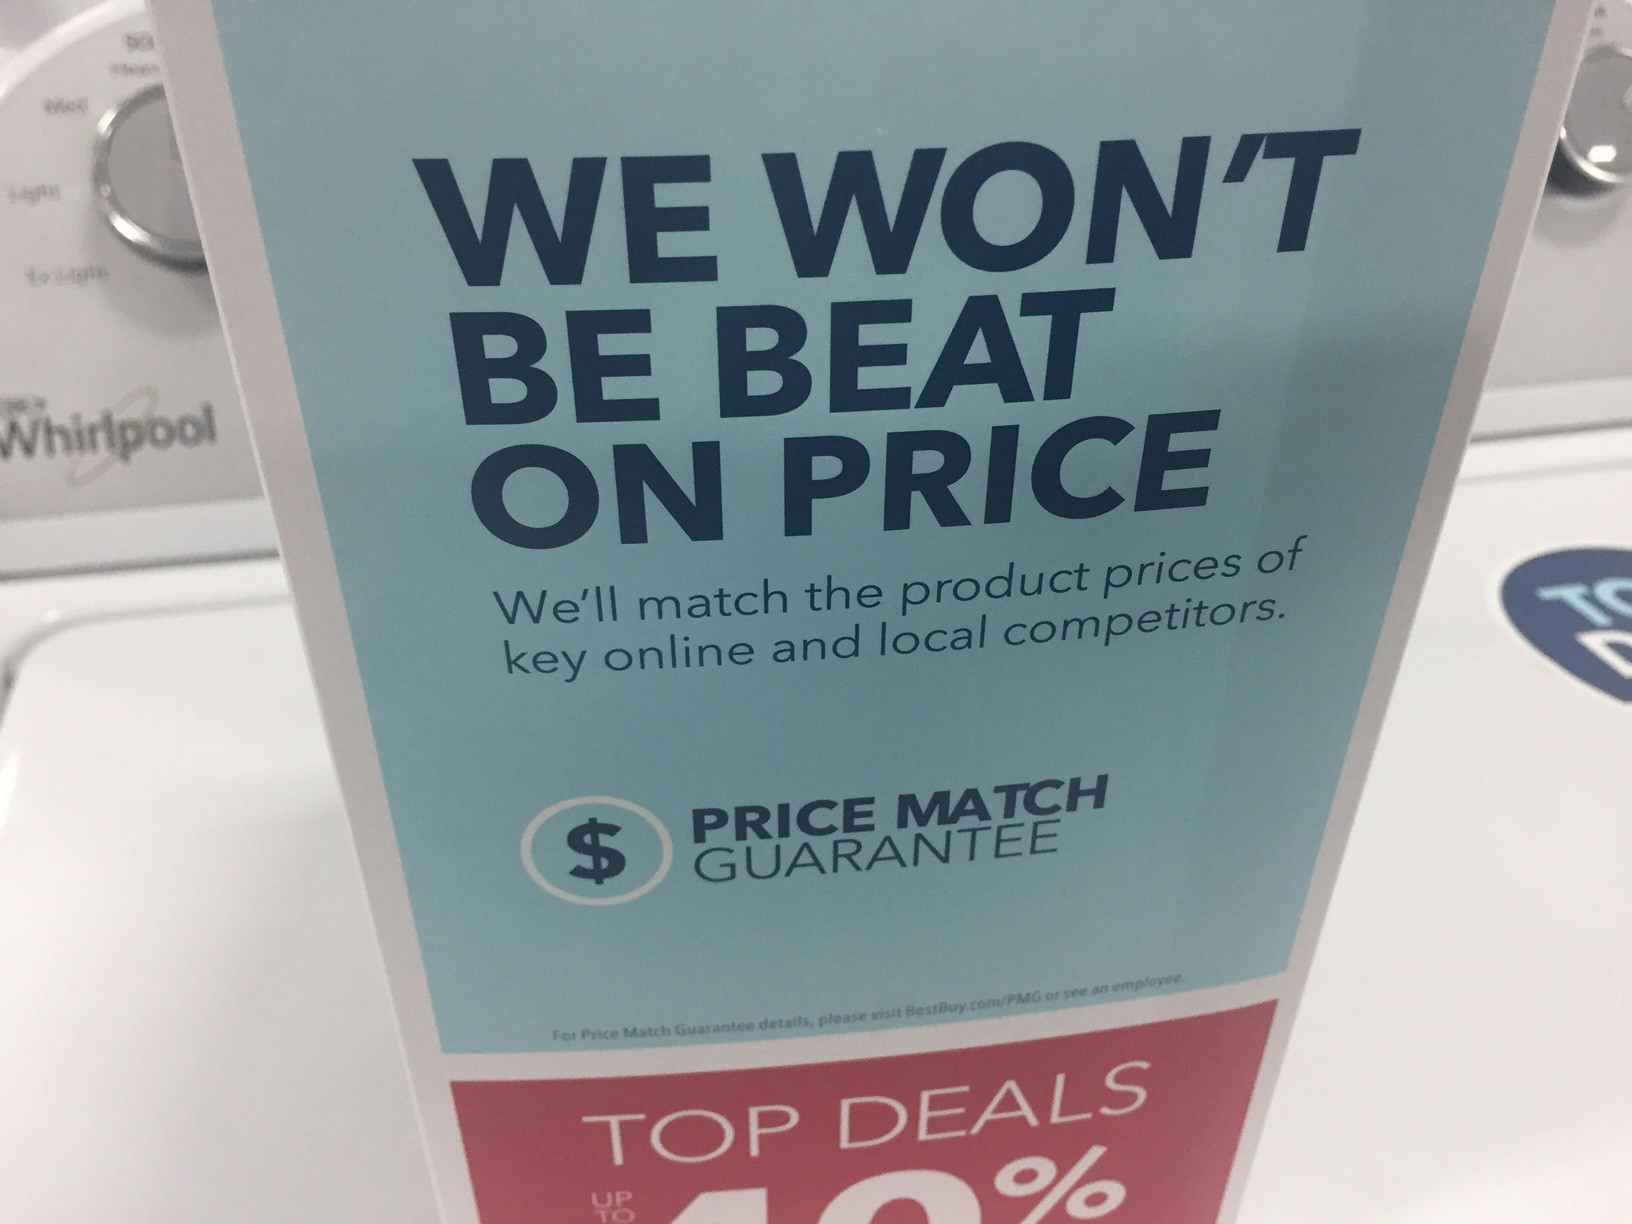 sign advertises best buy price match policy